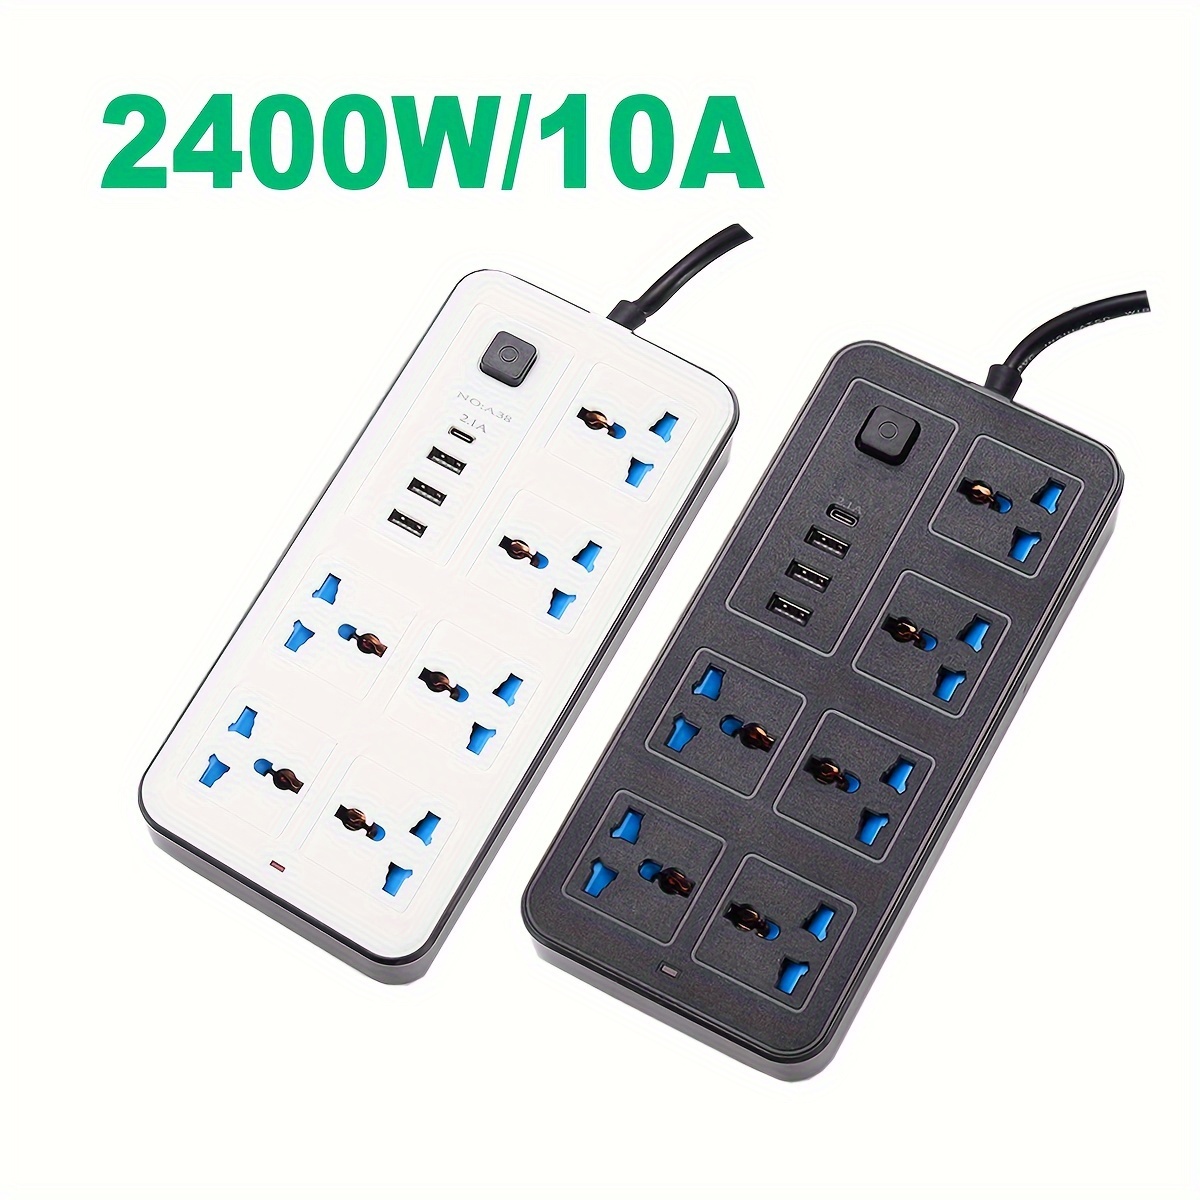 12 AC Power Strip Tower with 6 USB A, 5M Cable white [Plug Type F]